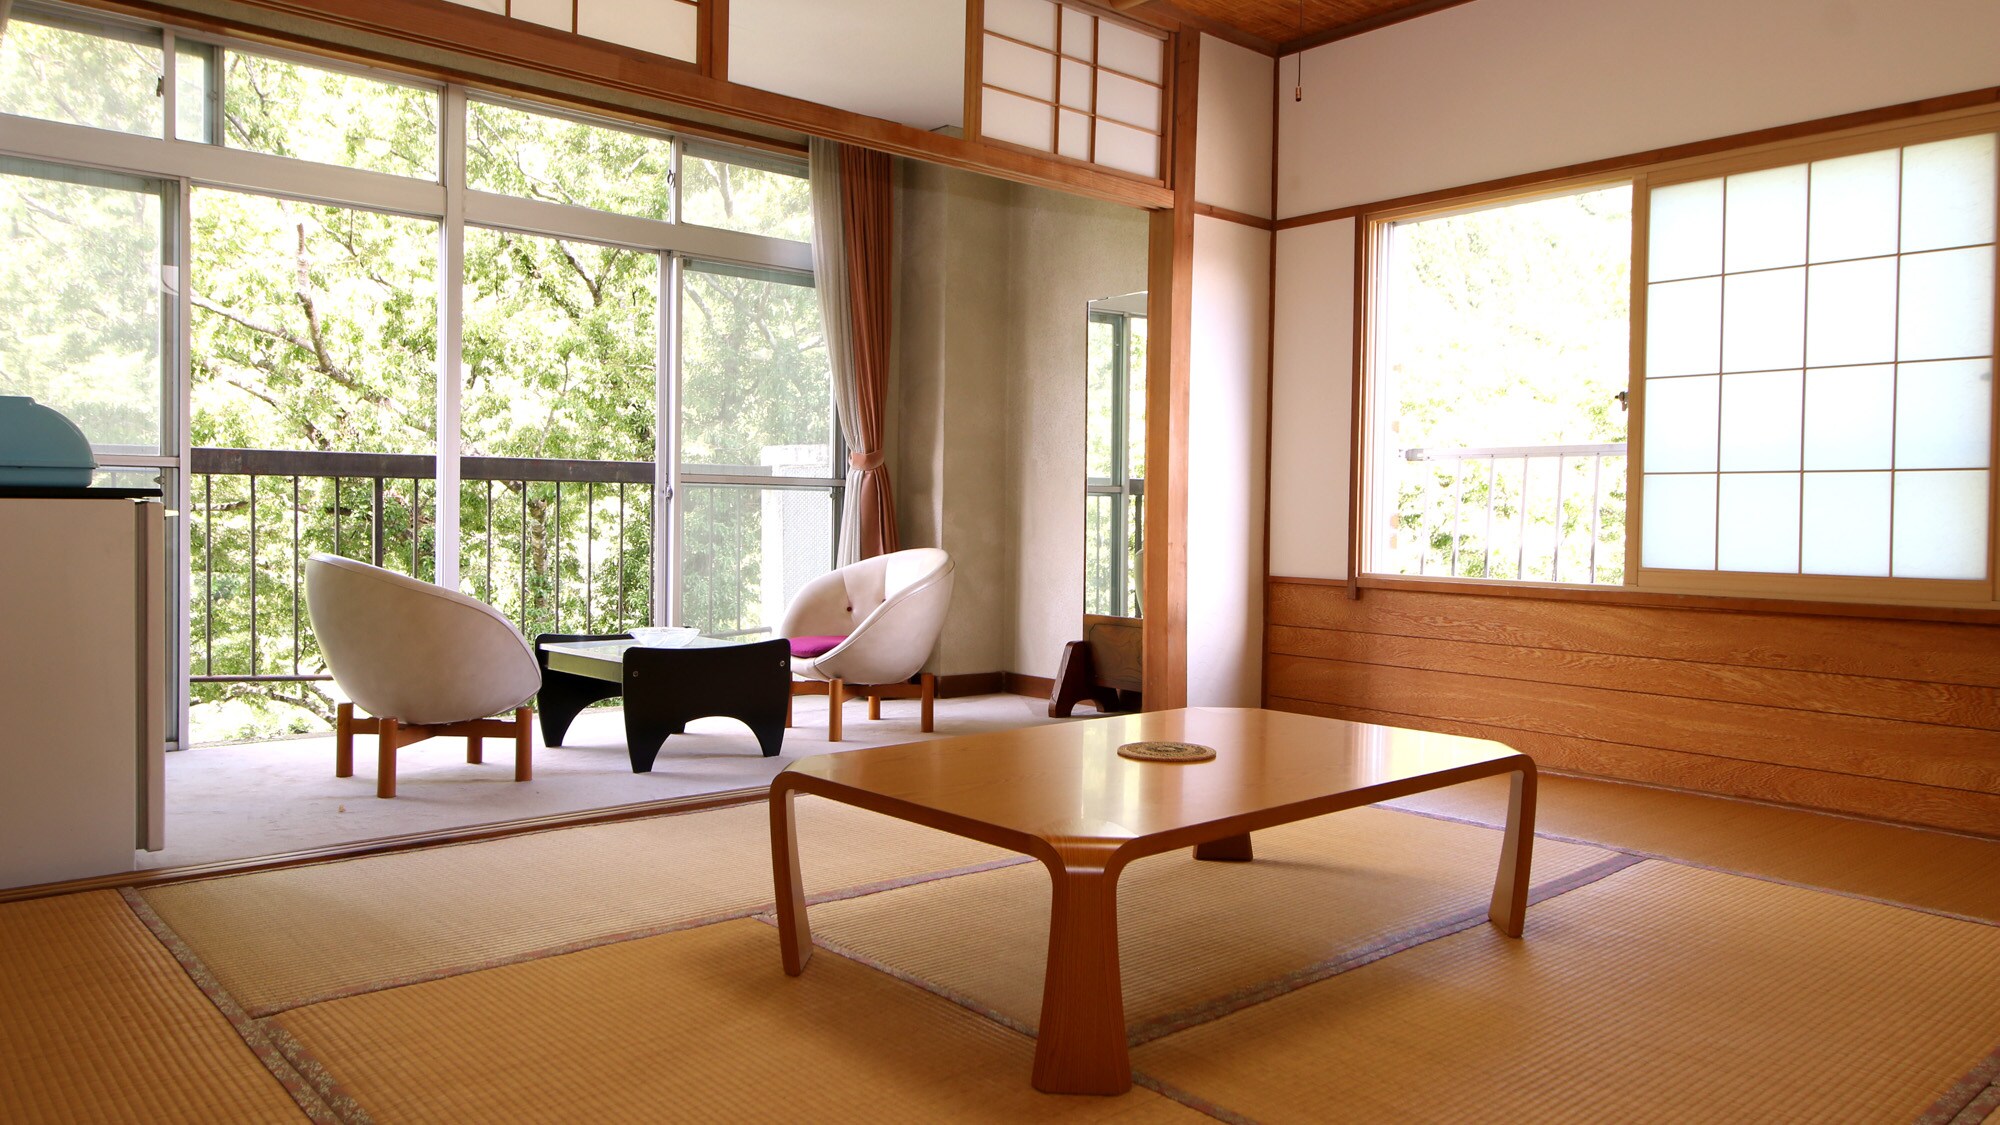 Guest room ◆ Large window where you can enjoy the nature of the valley from the room